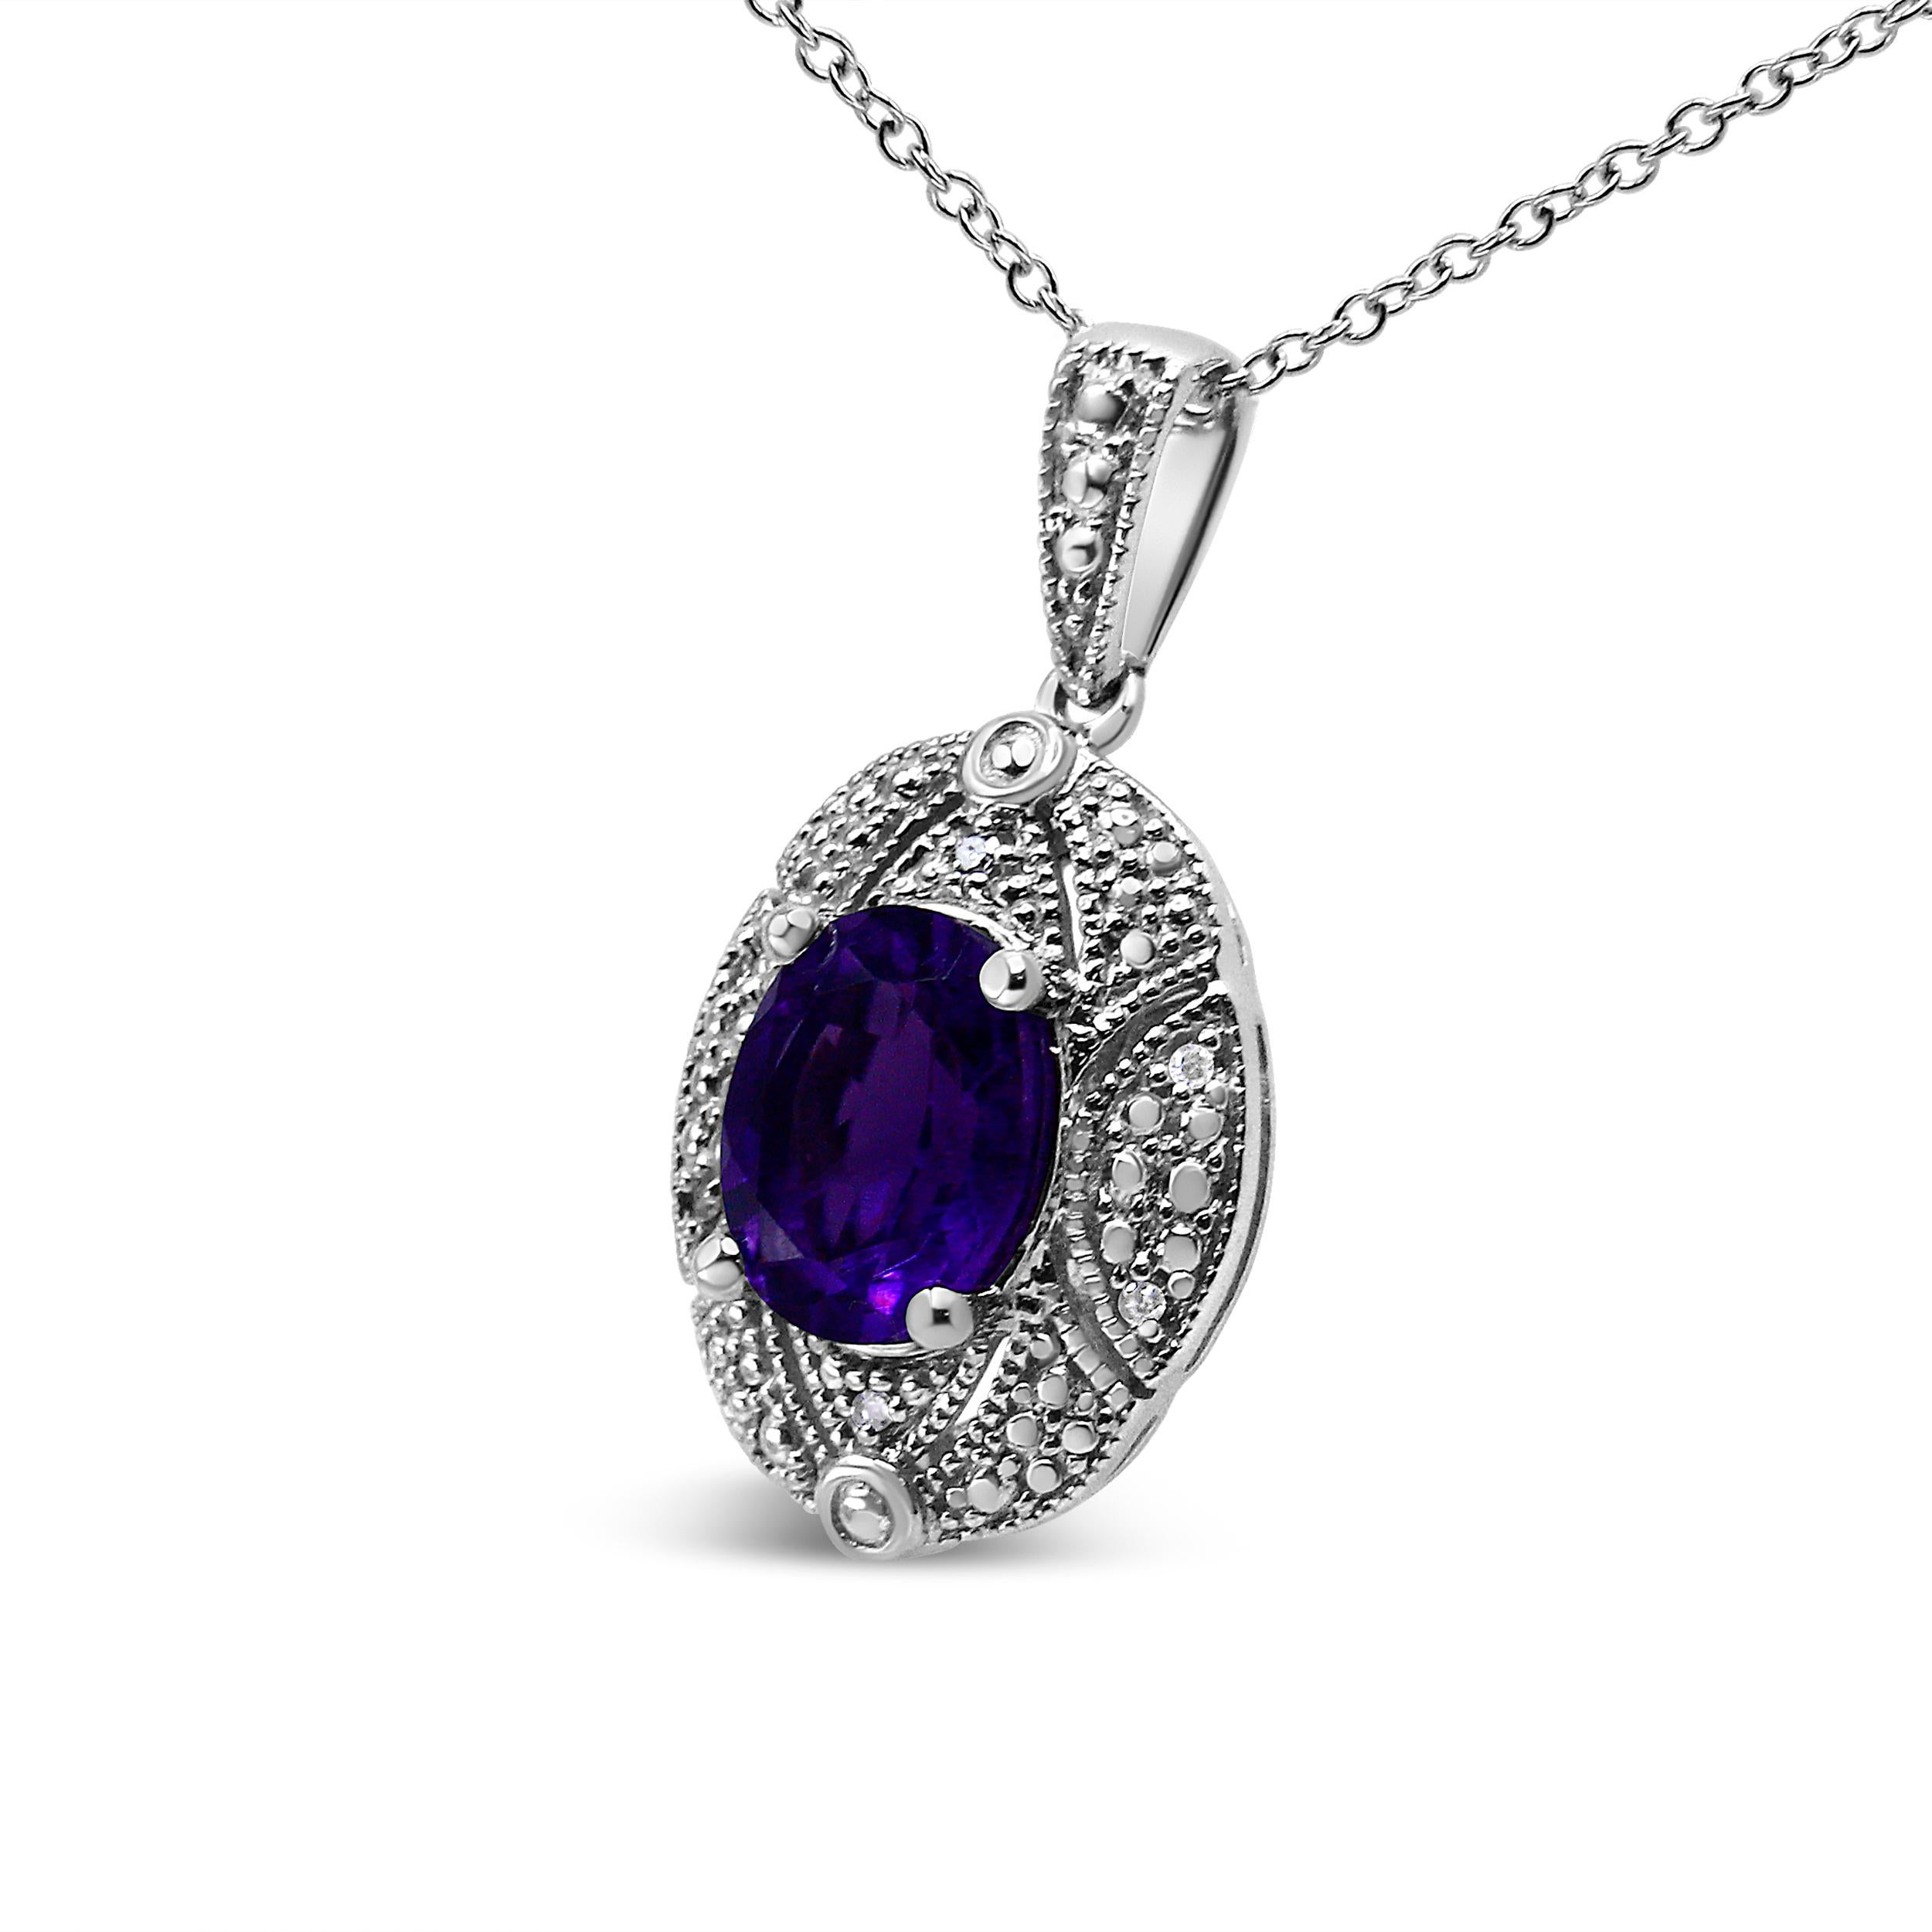 Intensify your look with the brilliant colors that radiate from this stunning diamond accent and gemstone pendant necklace! A gorgeous 9X7mm purple oval amethyst gemstone takes center stage in a sensational .925 sterling silver setting. The milgrain